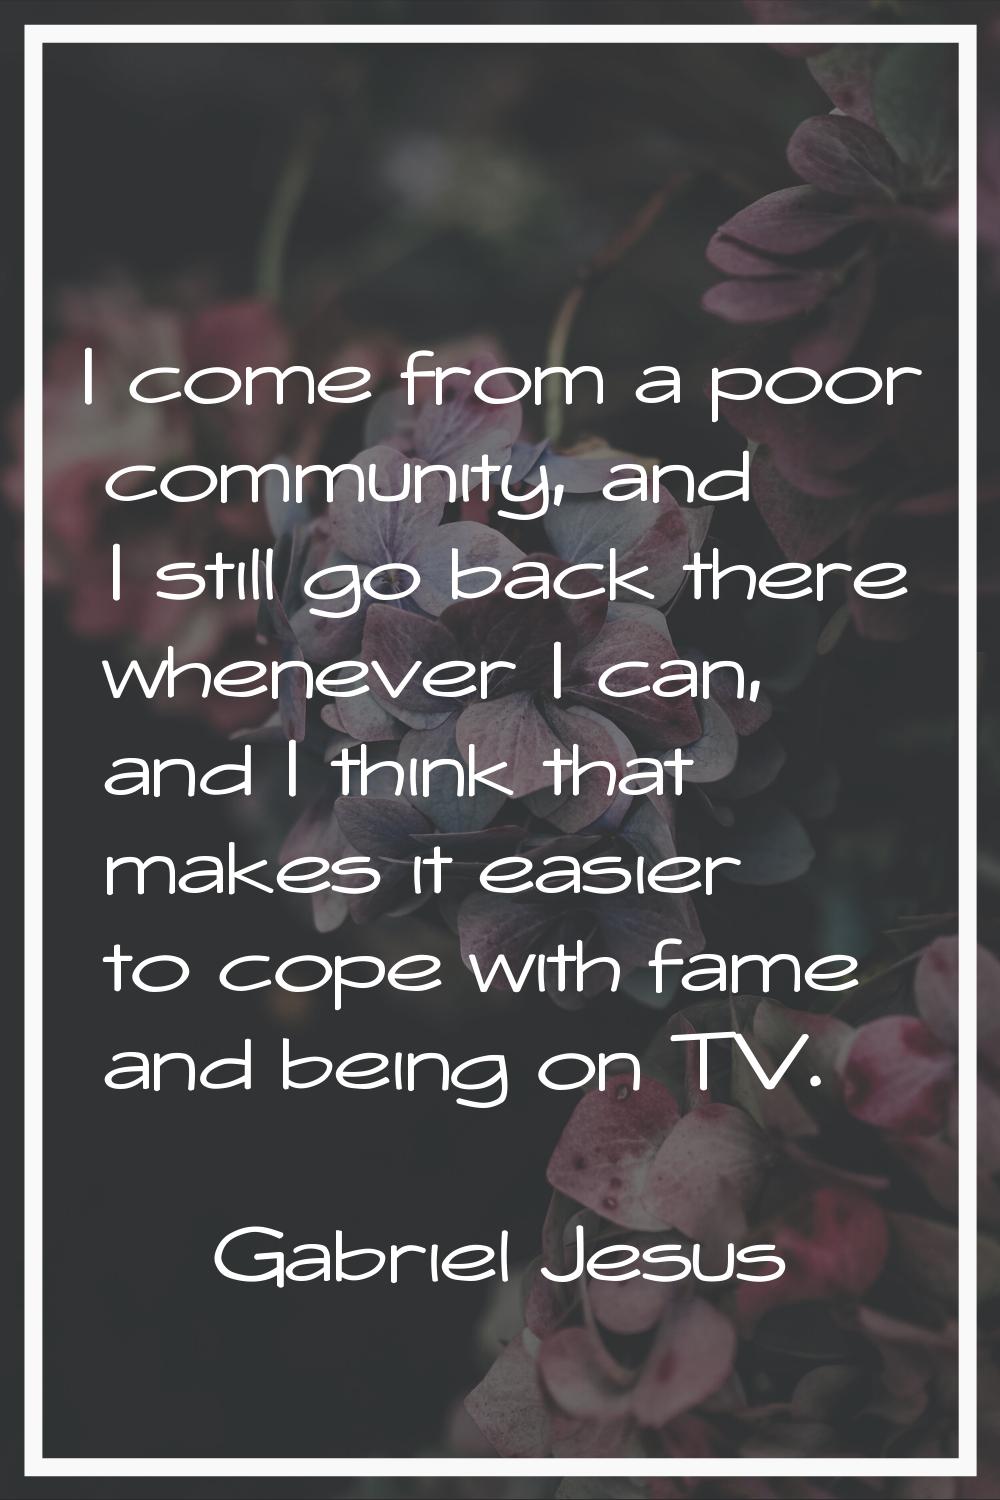 I come from a poor community, and I still go back there whenever I can, and I think that makes it e